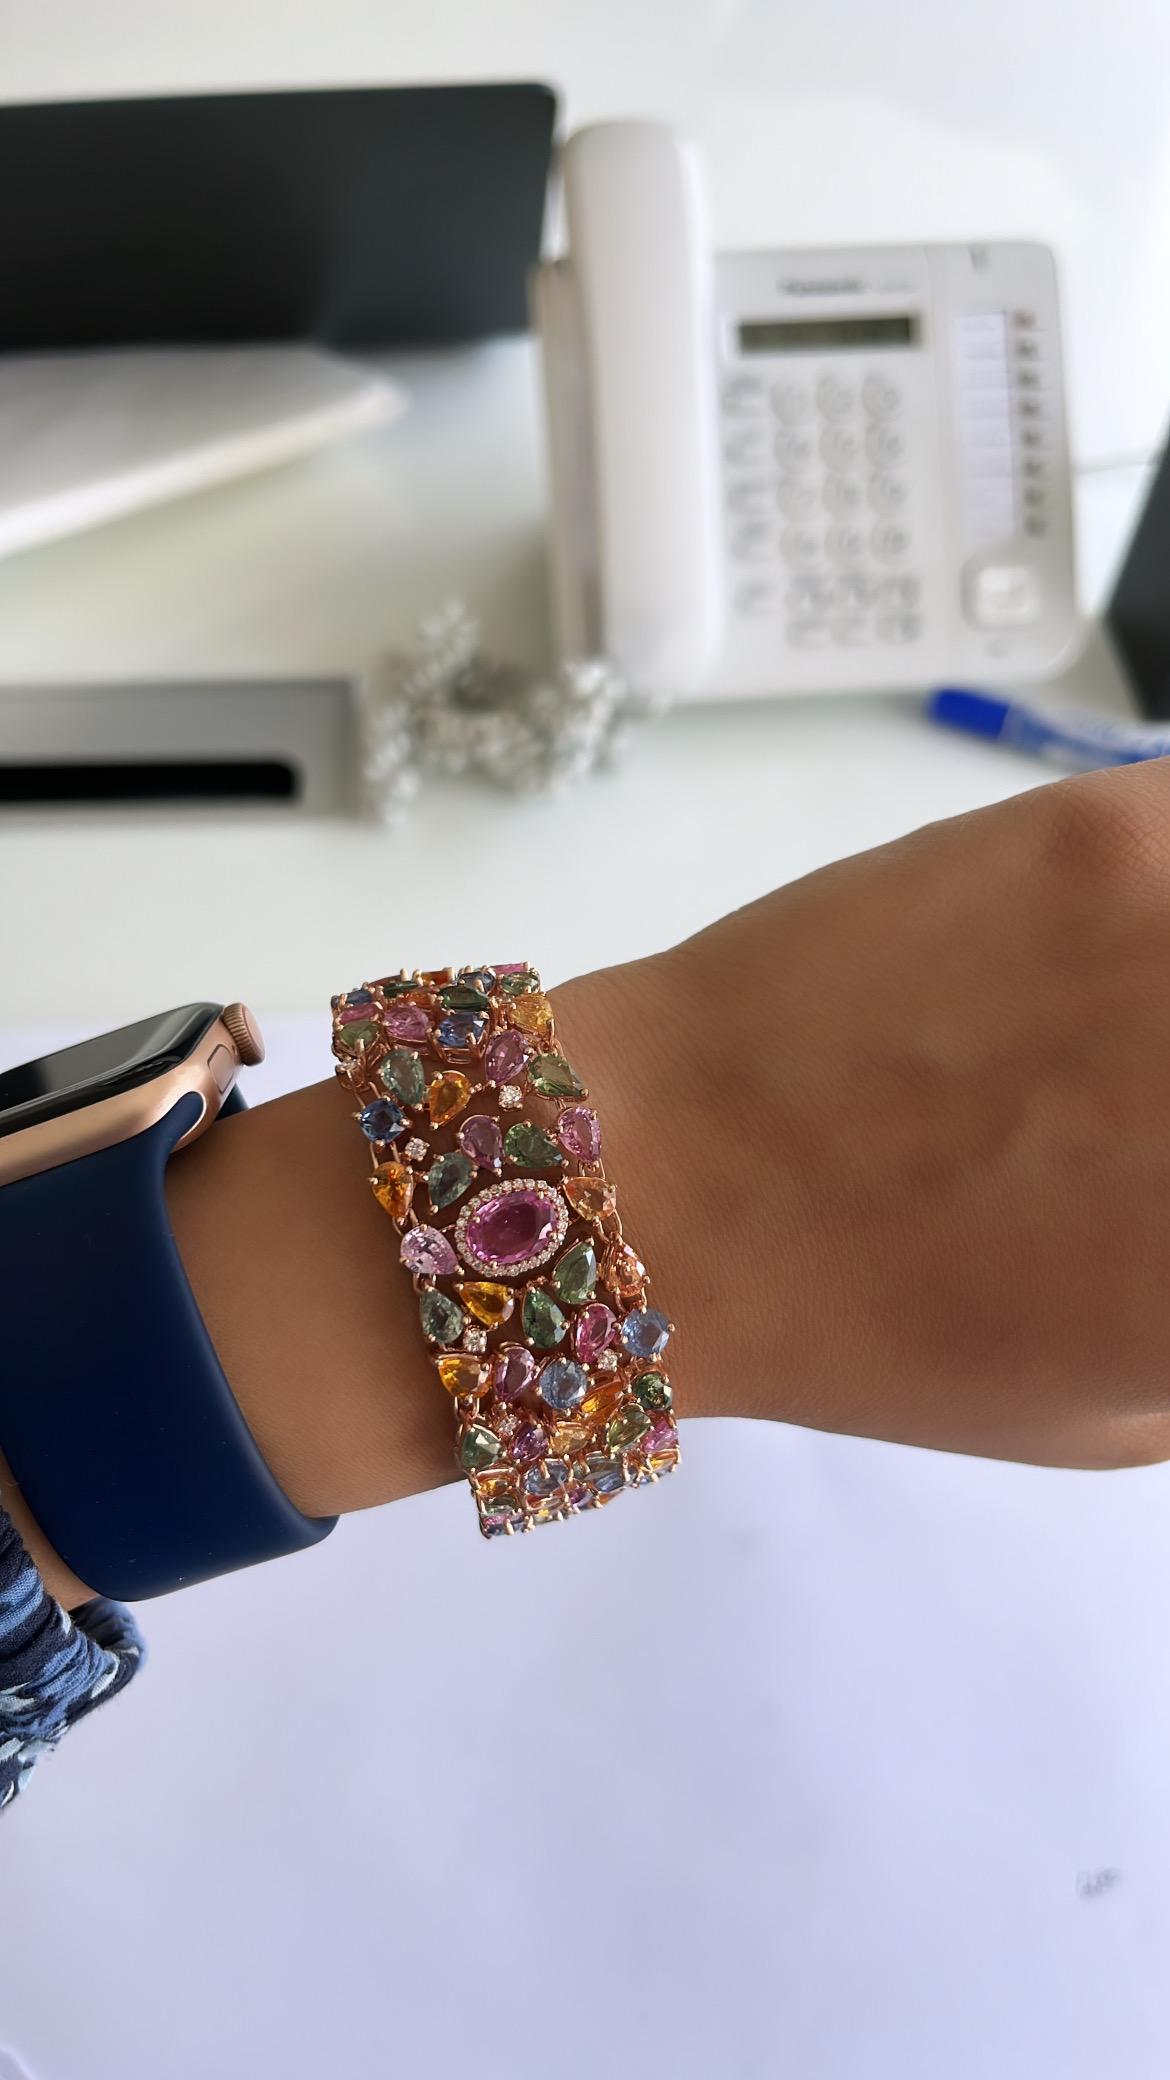 A very gorgeous and one of a kind, Multi Sapphire Link Bracelet set in 18K Rose gold & Diamonds. The weight of the Multi Sapphires is 62.26 carats. The weight of the centre Pink Sapphire is 1.45 carats. All the Sapphires are natural and are of